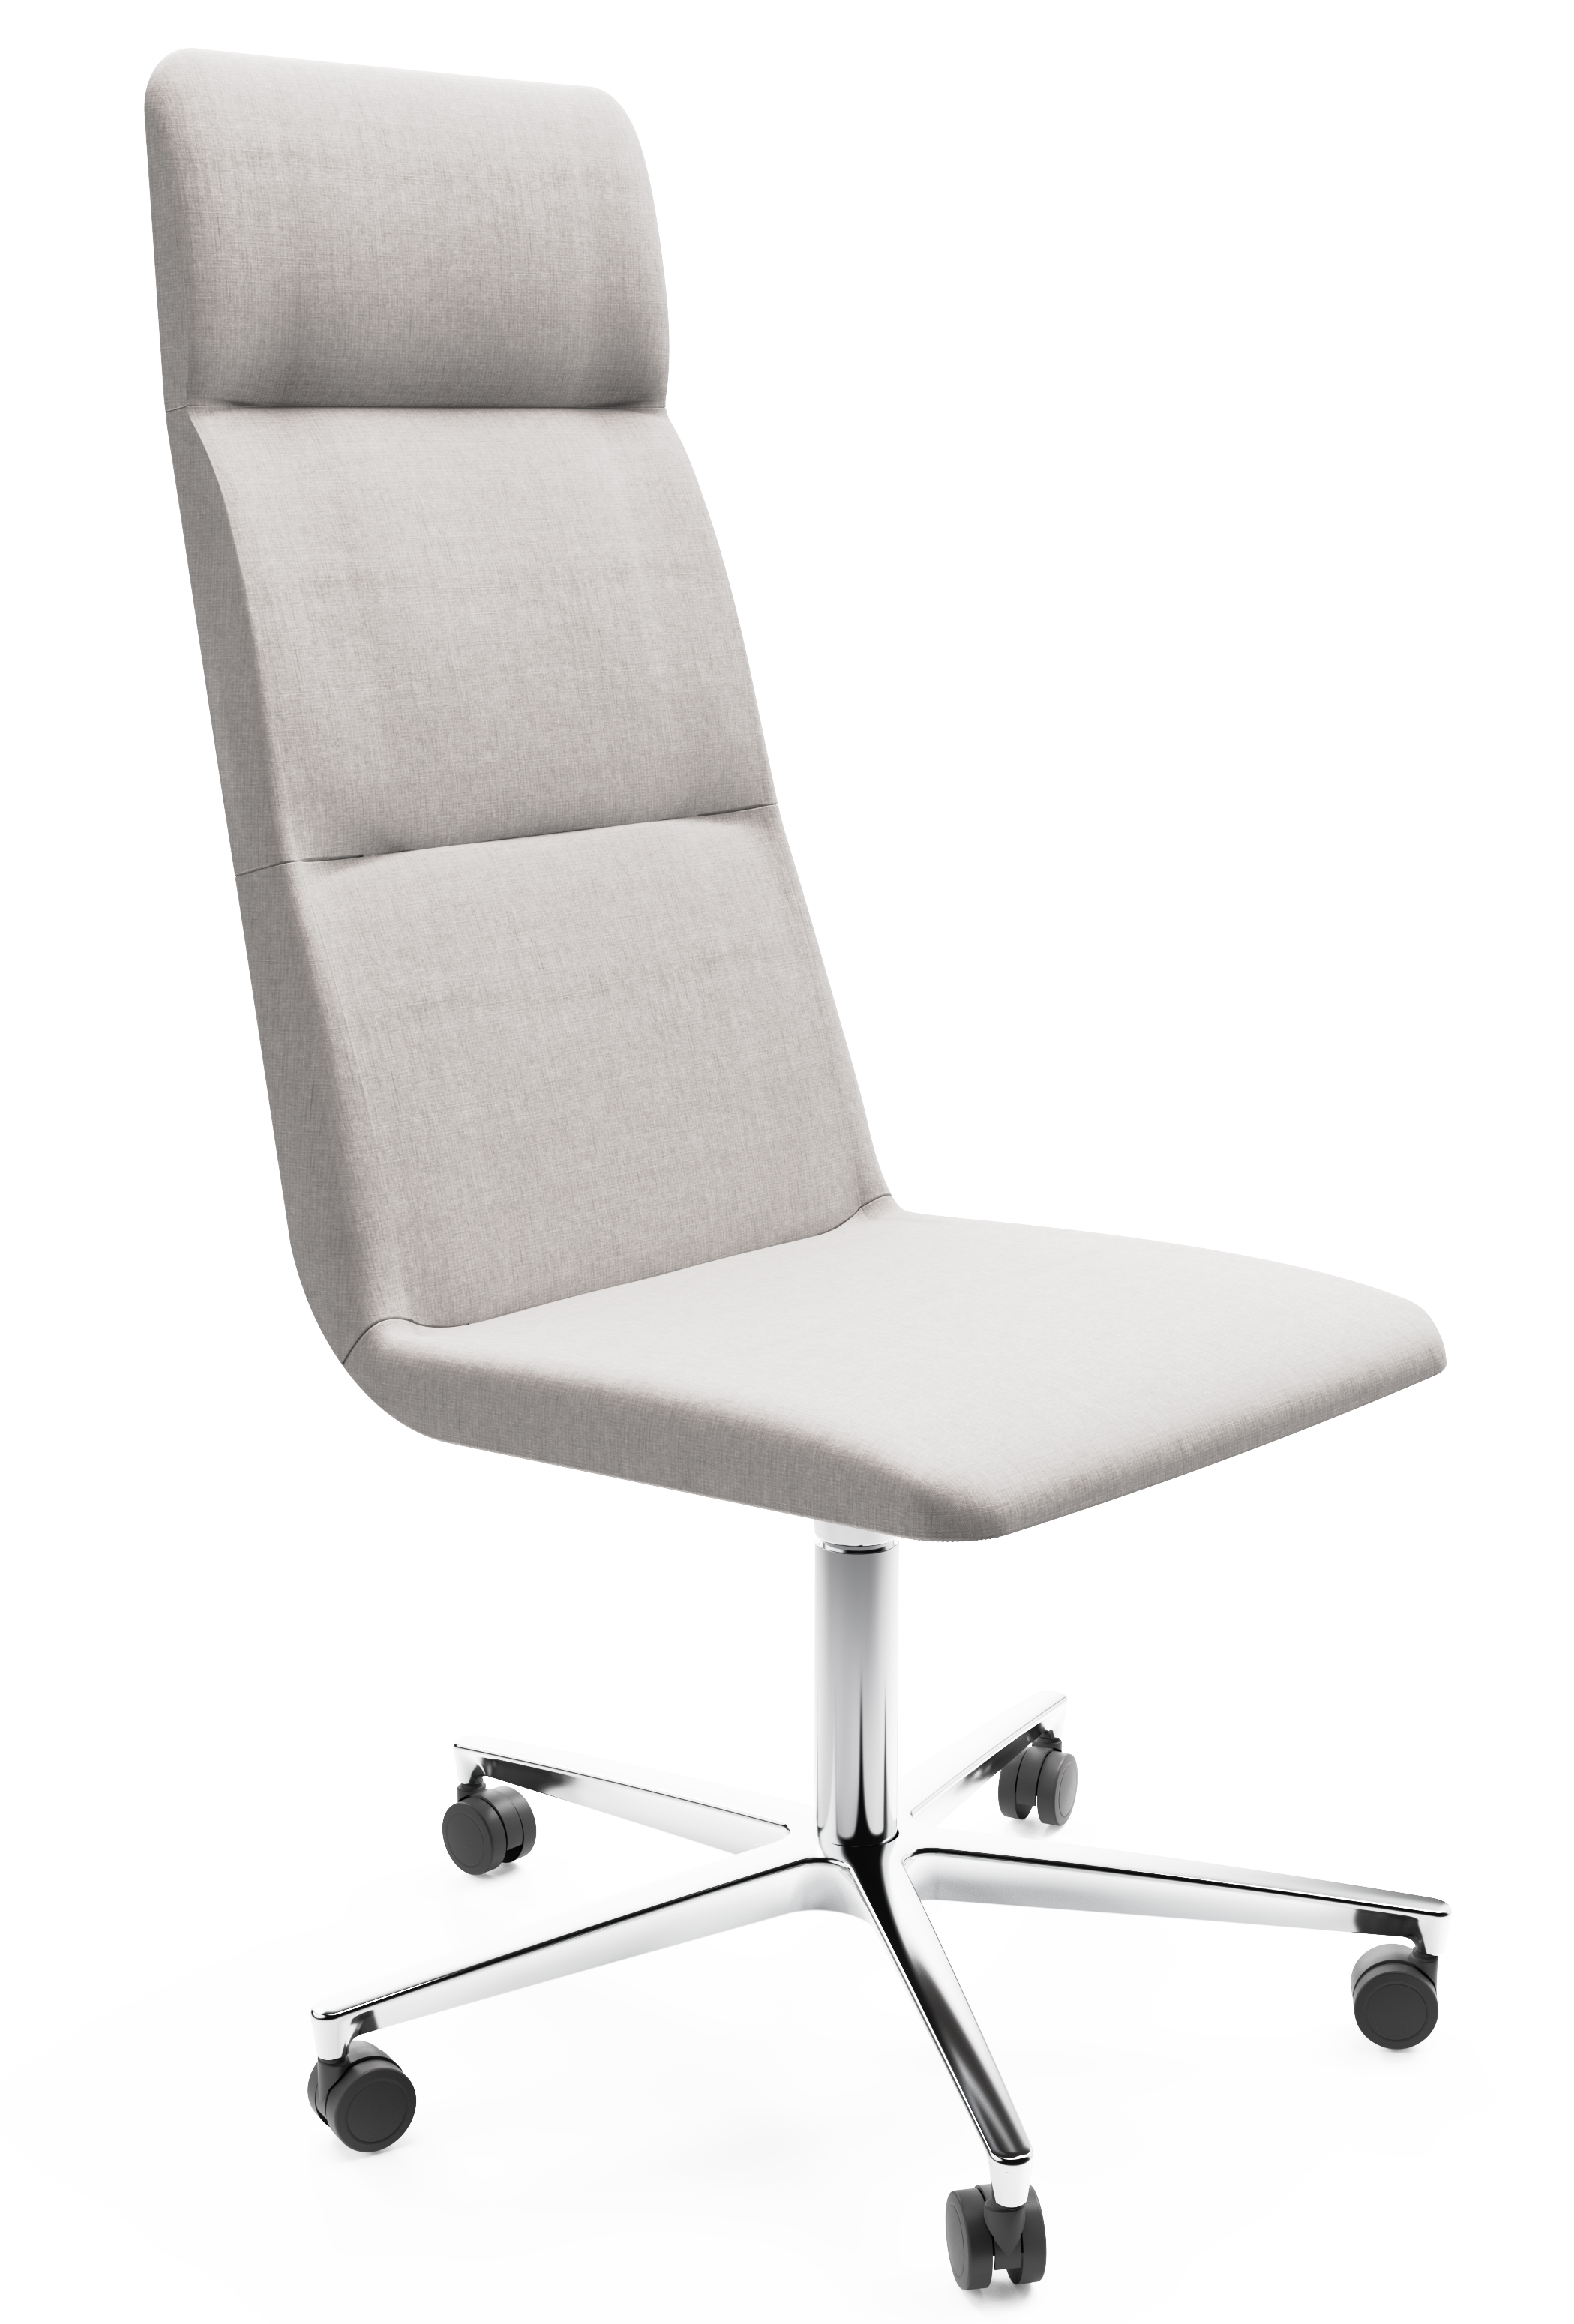 WS - Accord high 5 star base chair - chrome - remix 126 - front angle